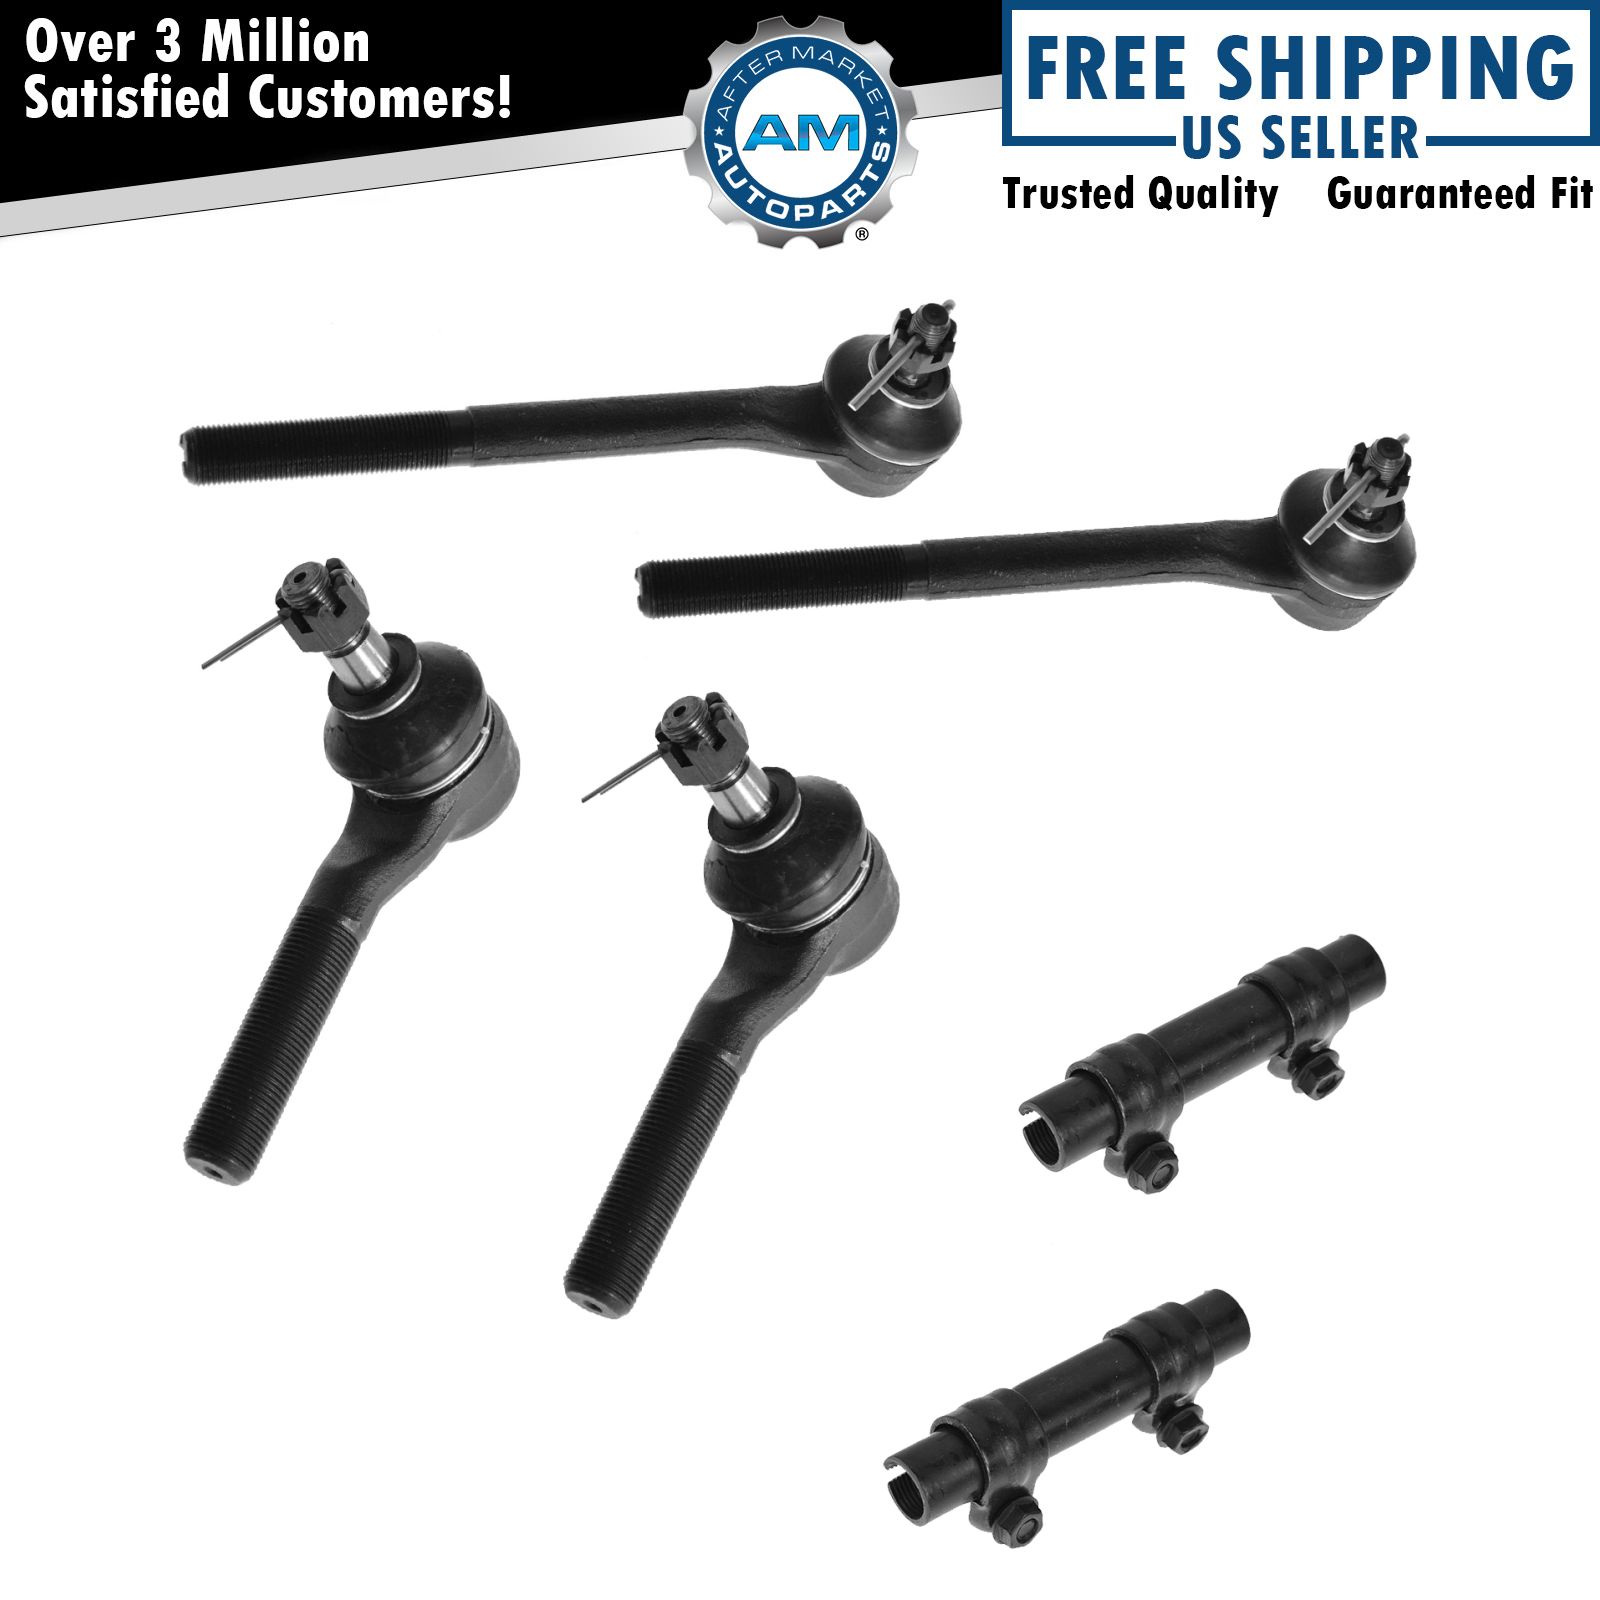 Tie Rod Ends Front Inner Outer Sleeve Set of 6 for S10 S15 Jimmy Blazer Sonoma